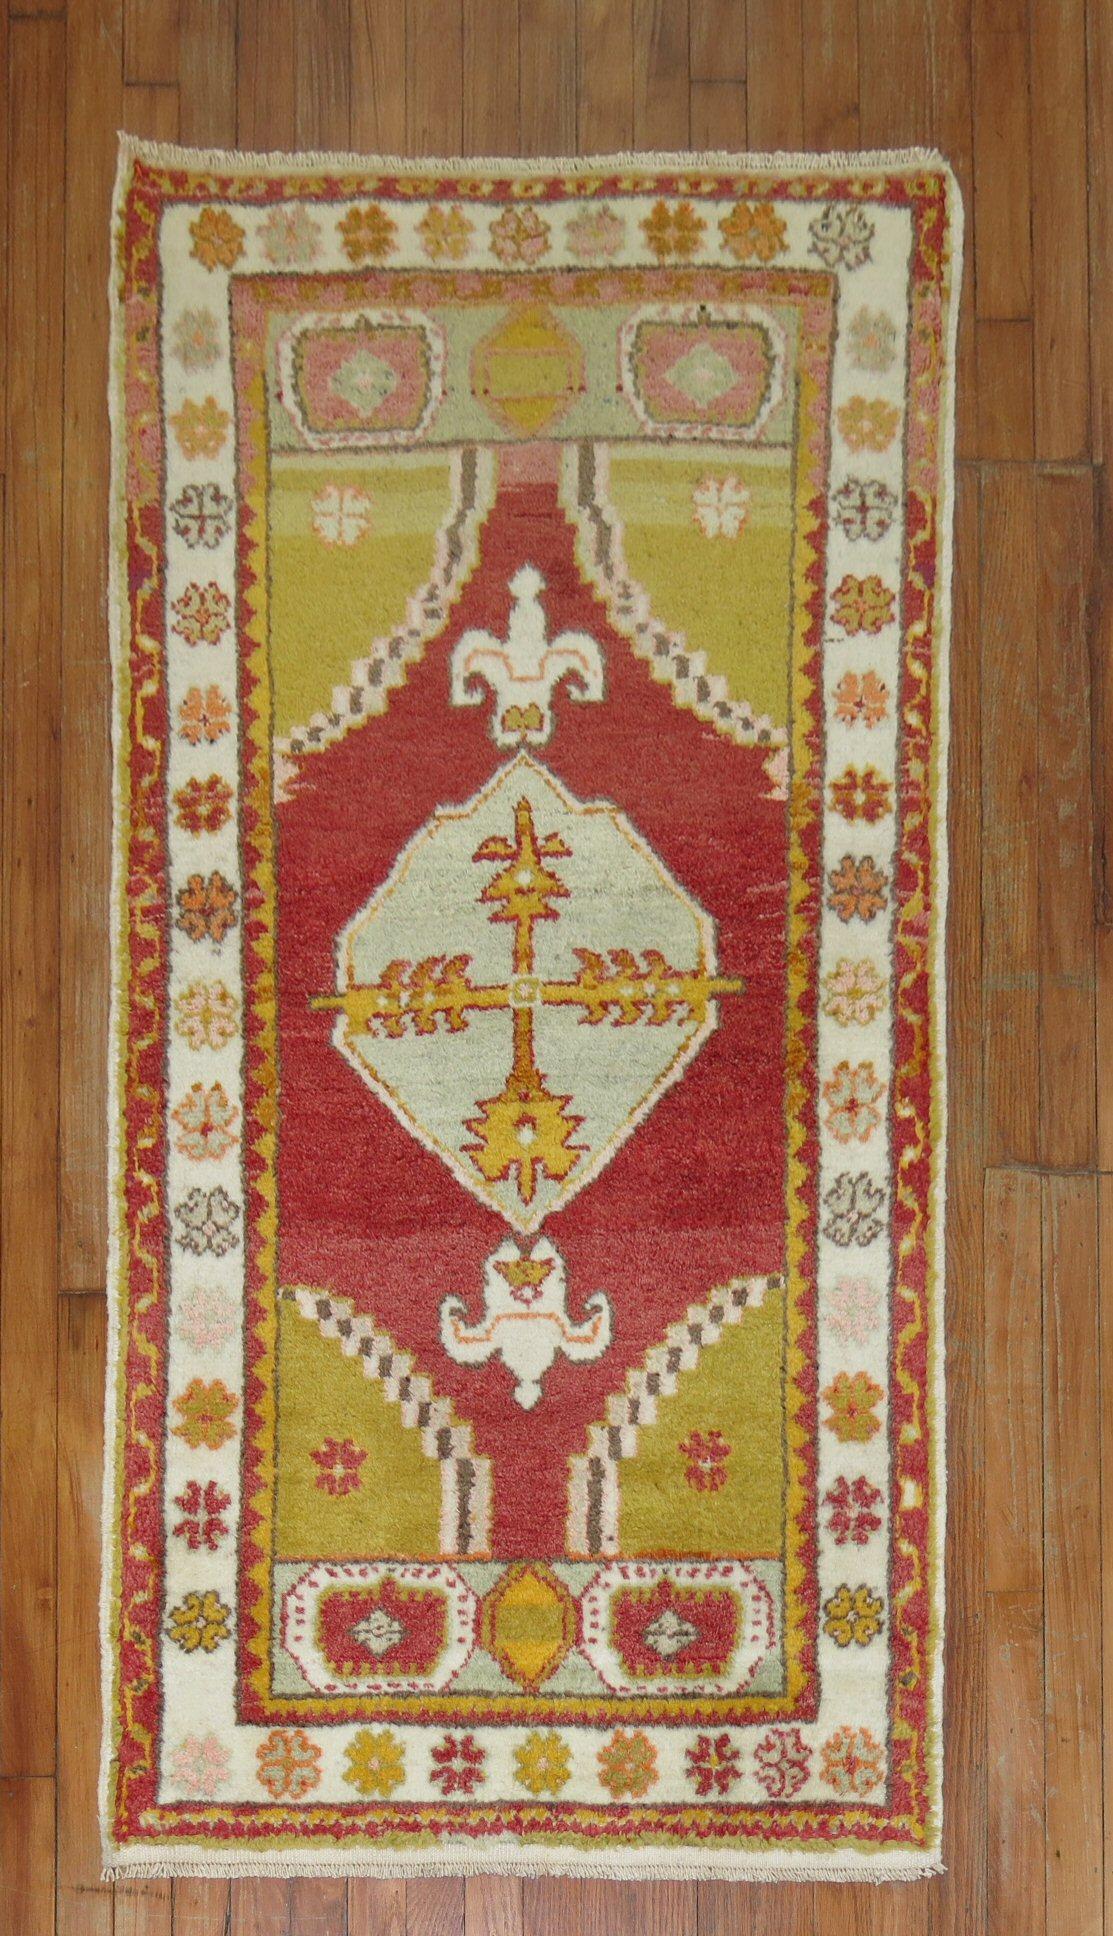 A colorful Mid-20th Century Turkish rug

Measures: 3'9'' x 5'.